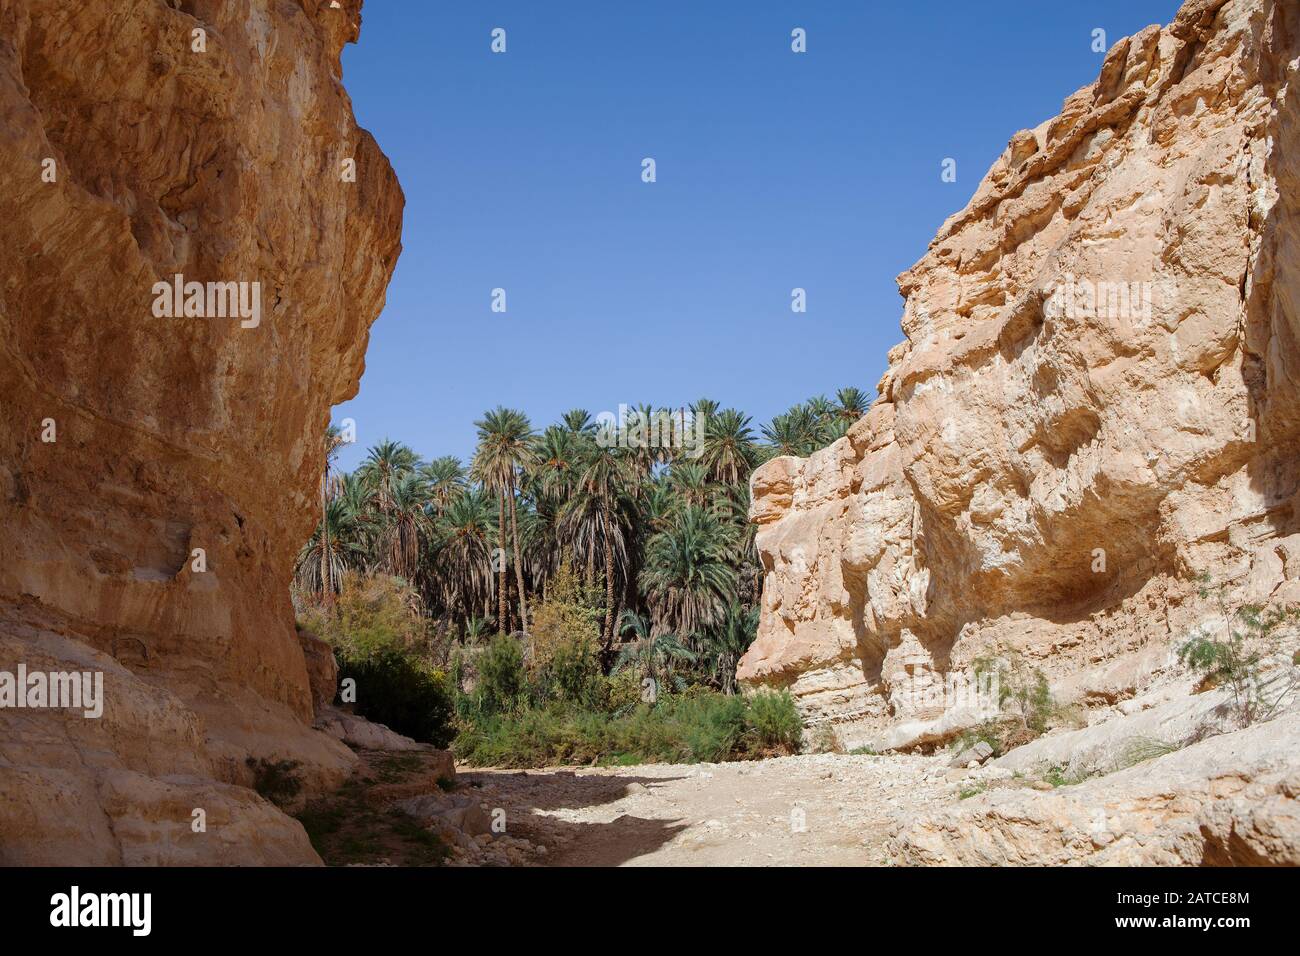 The canyon overlooks the Tamerza oasis with palm trees Stock Photo